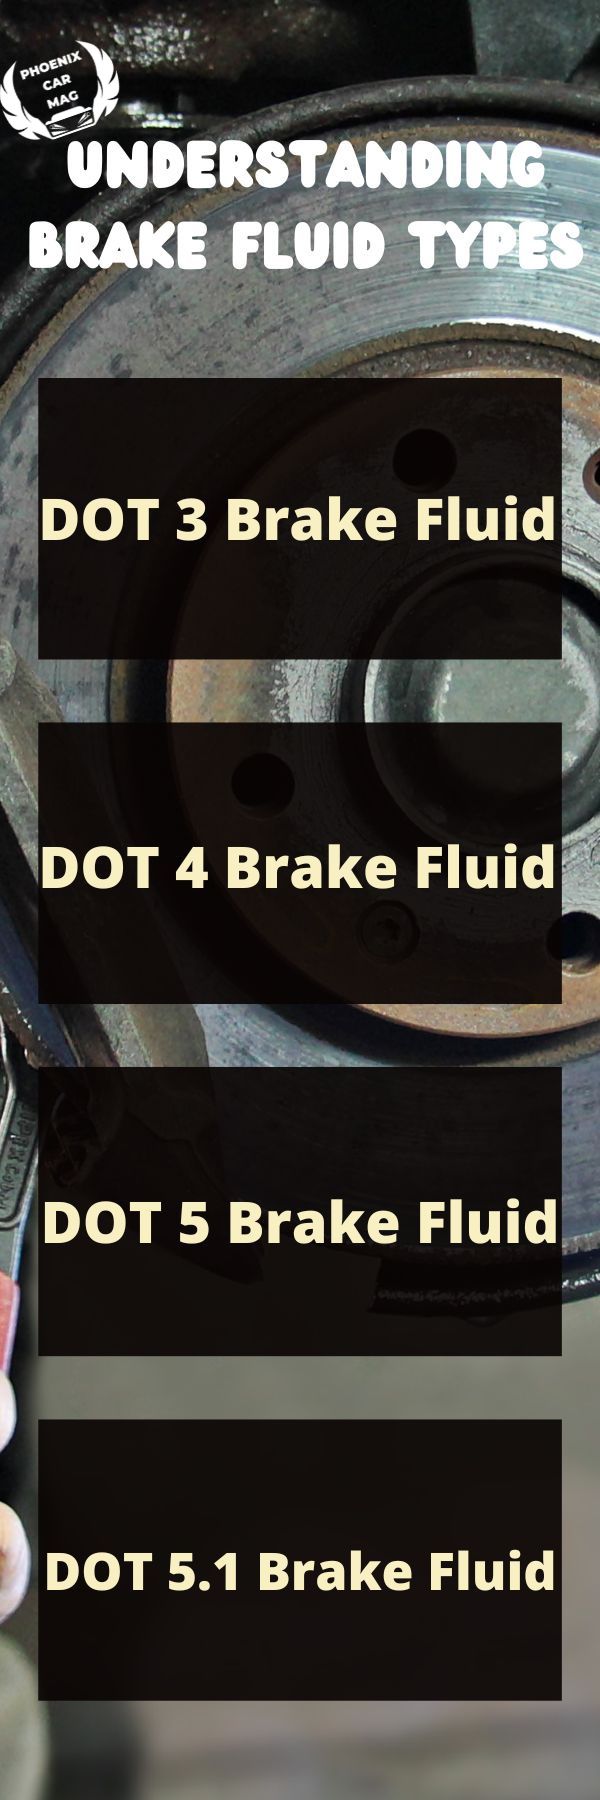 an infographic about Understanding Brake Fluid Types and Their Differences